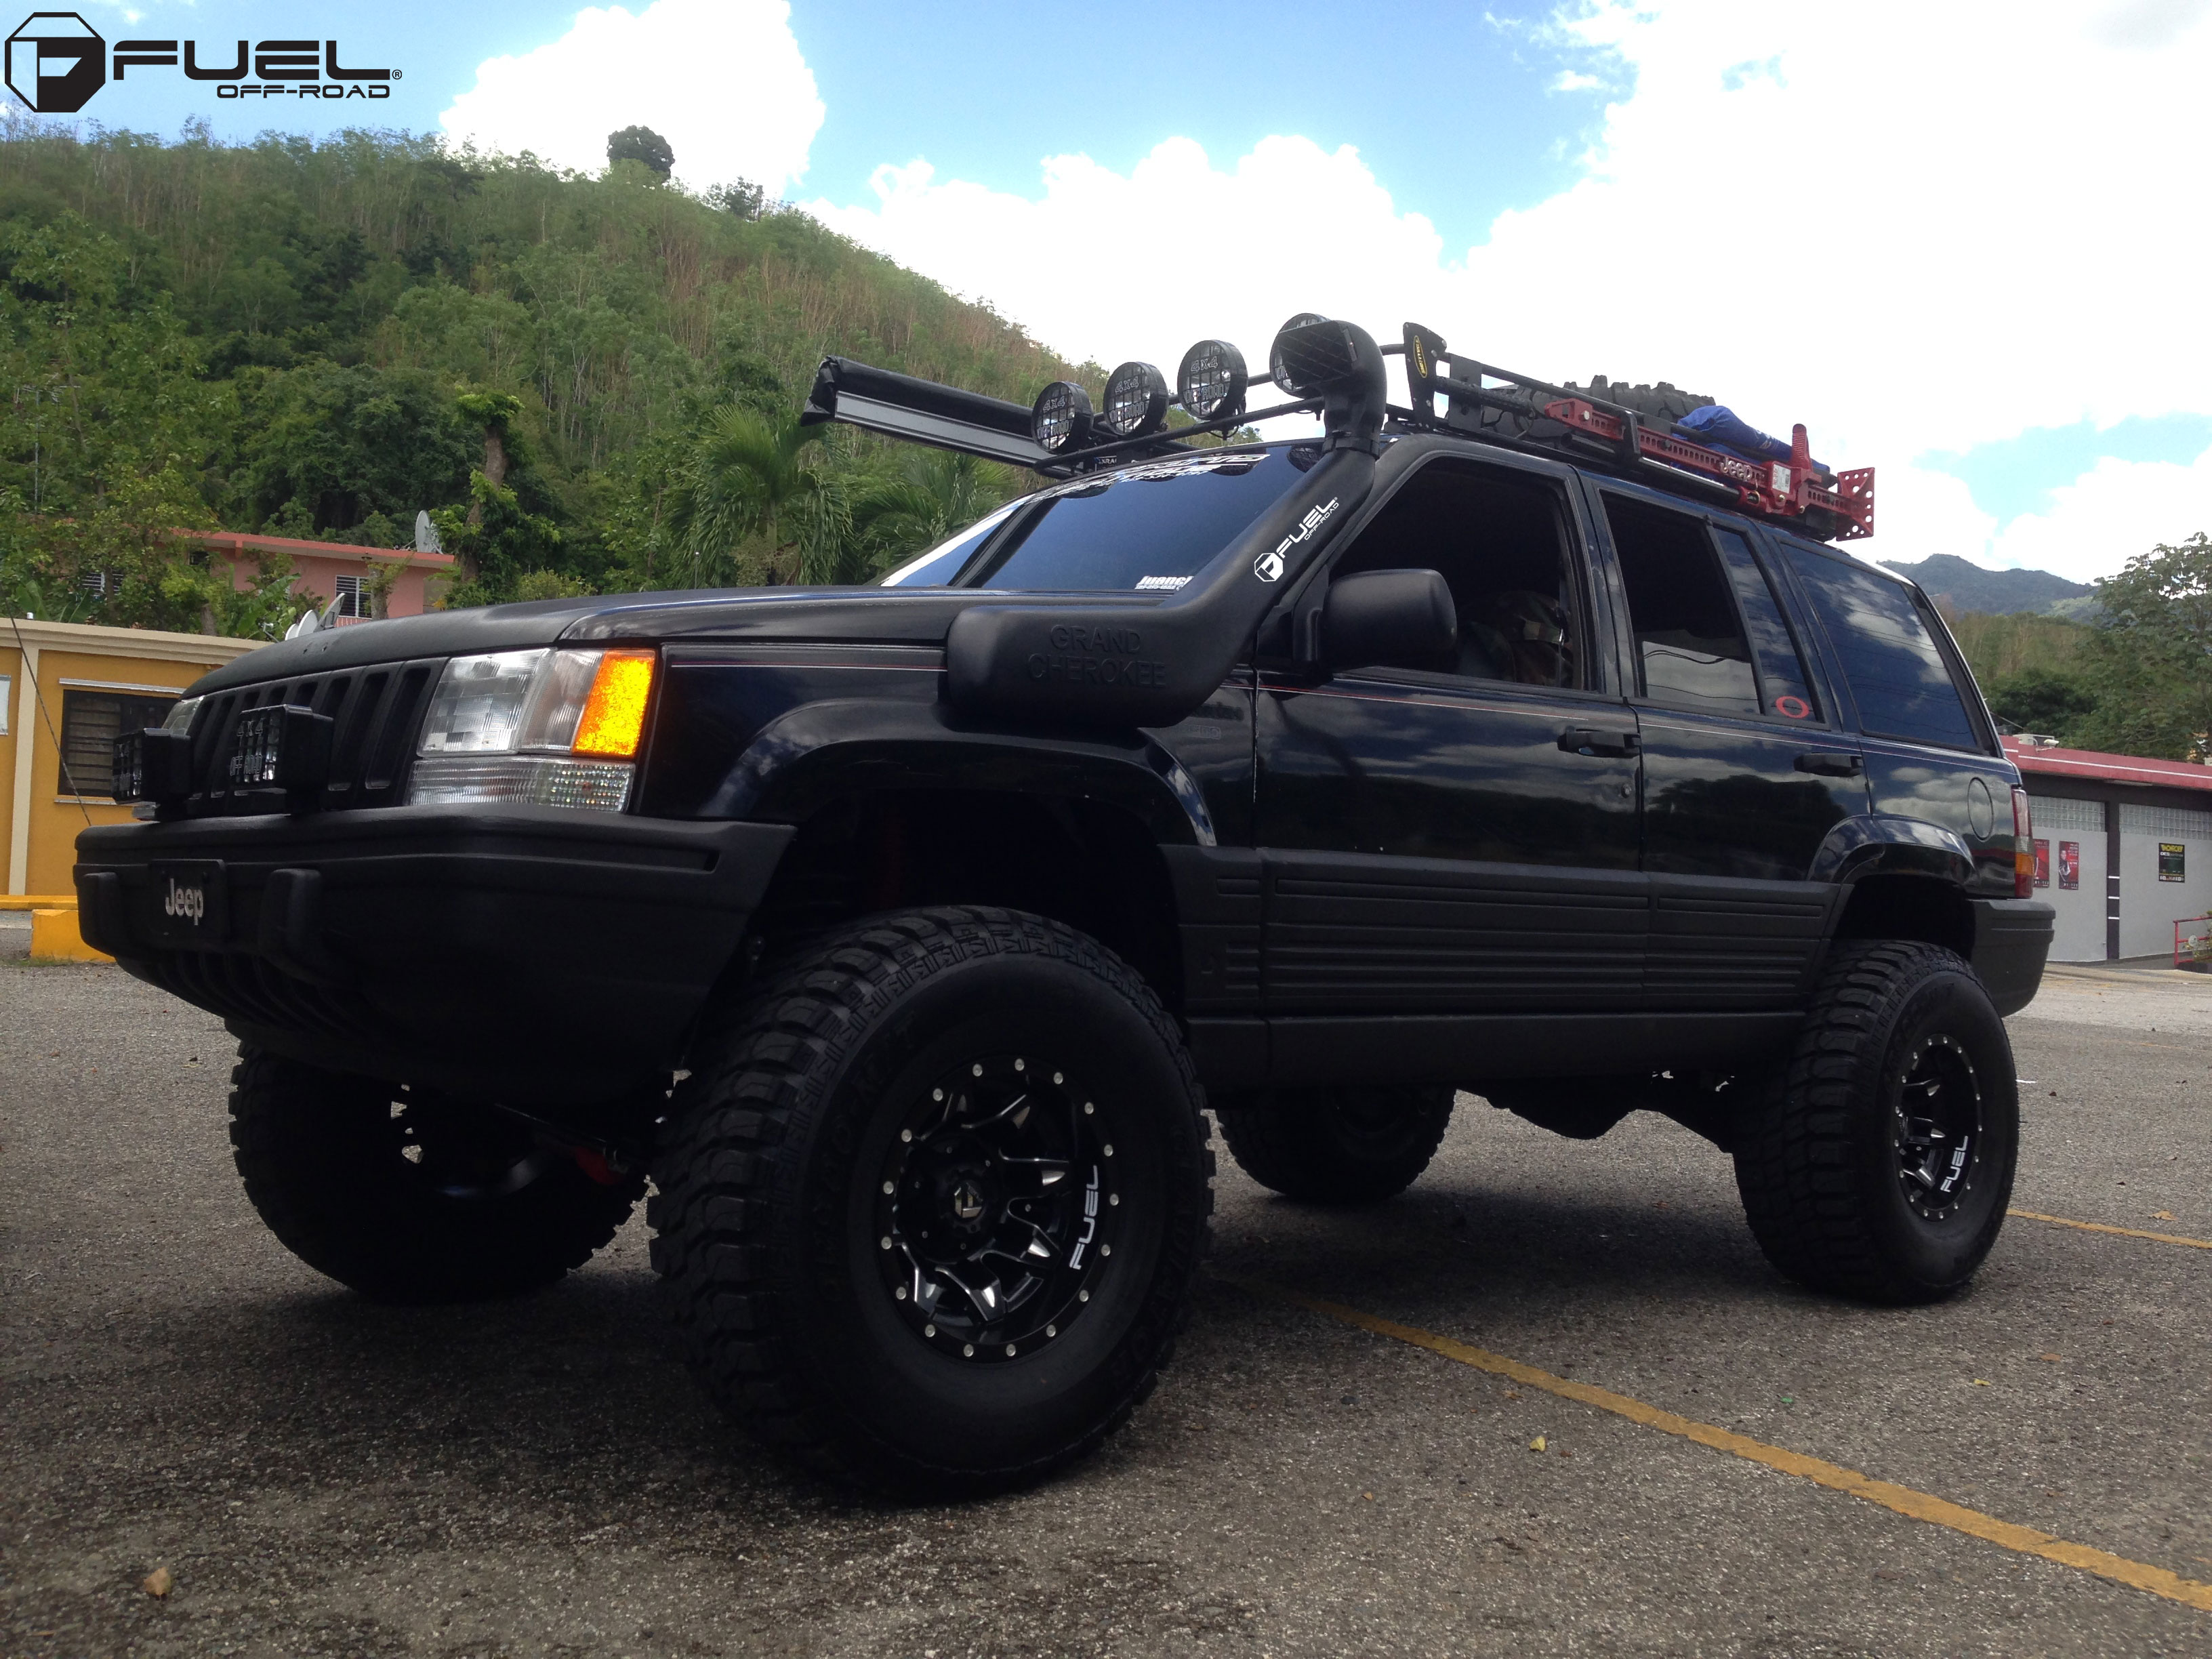 Jeep Grand Cherokee Lethal D567 Gallery Fuel OffRoad